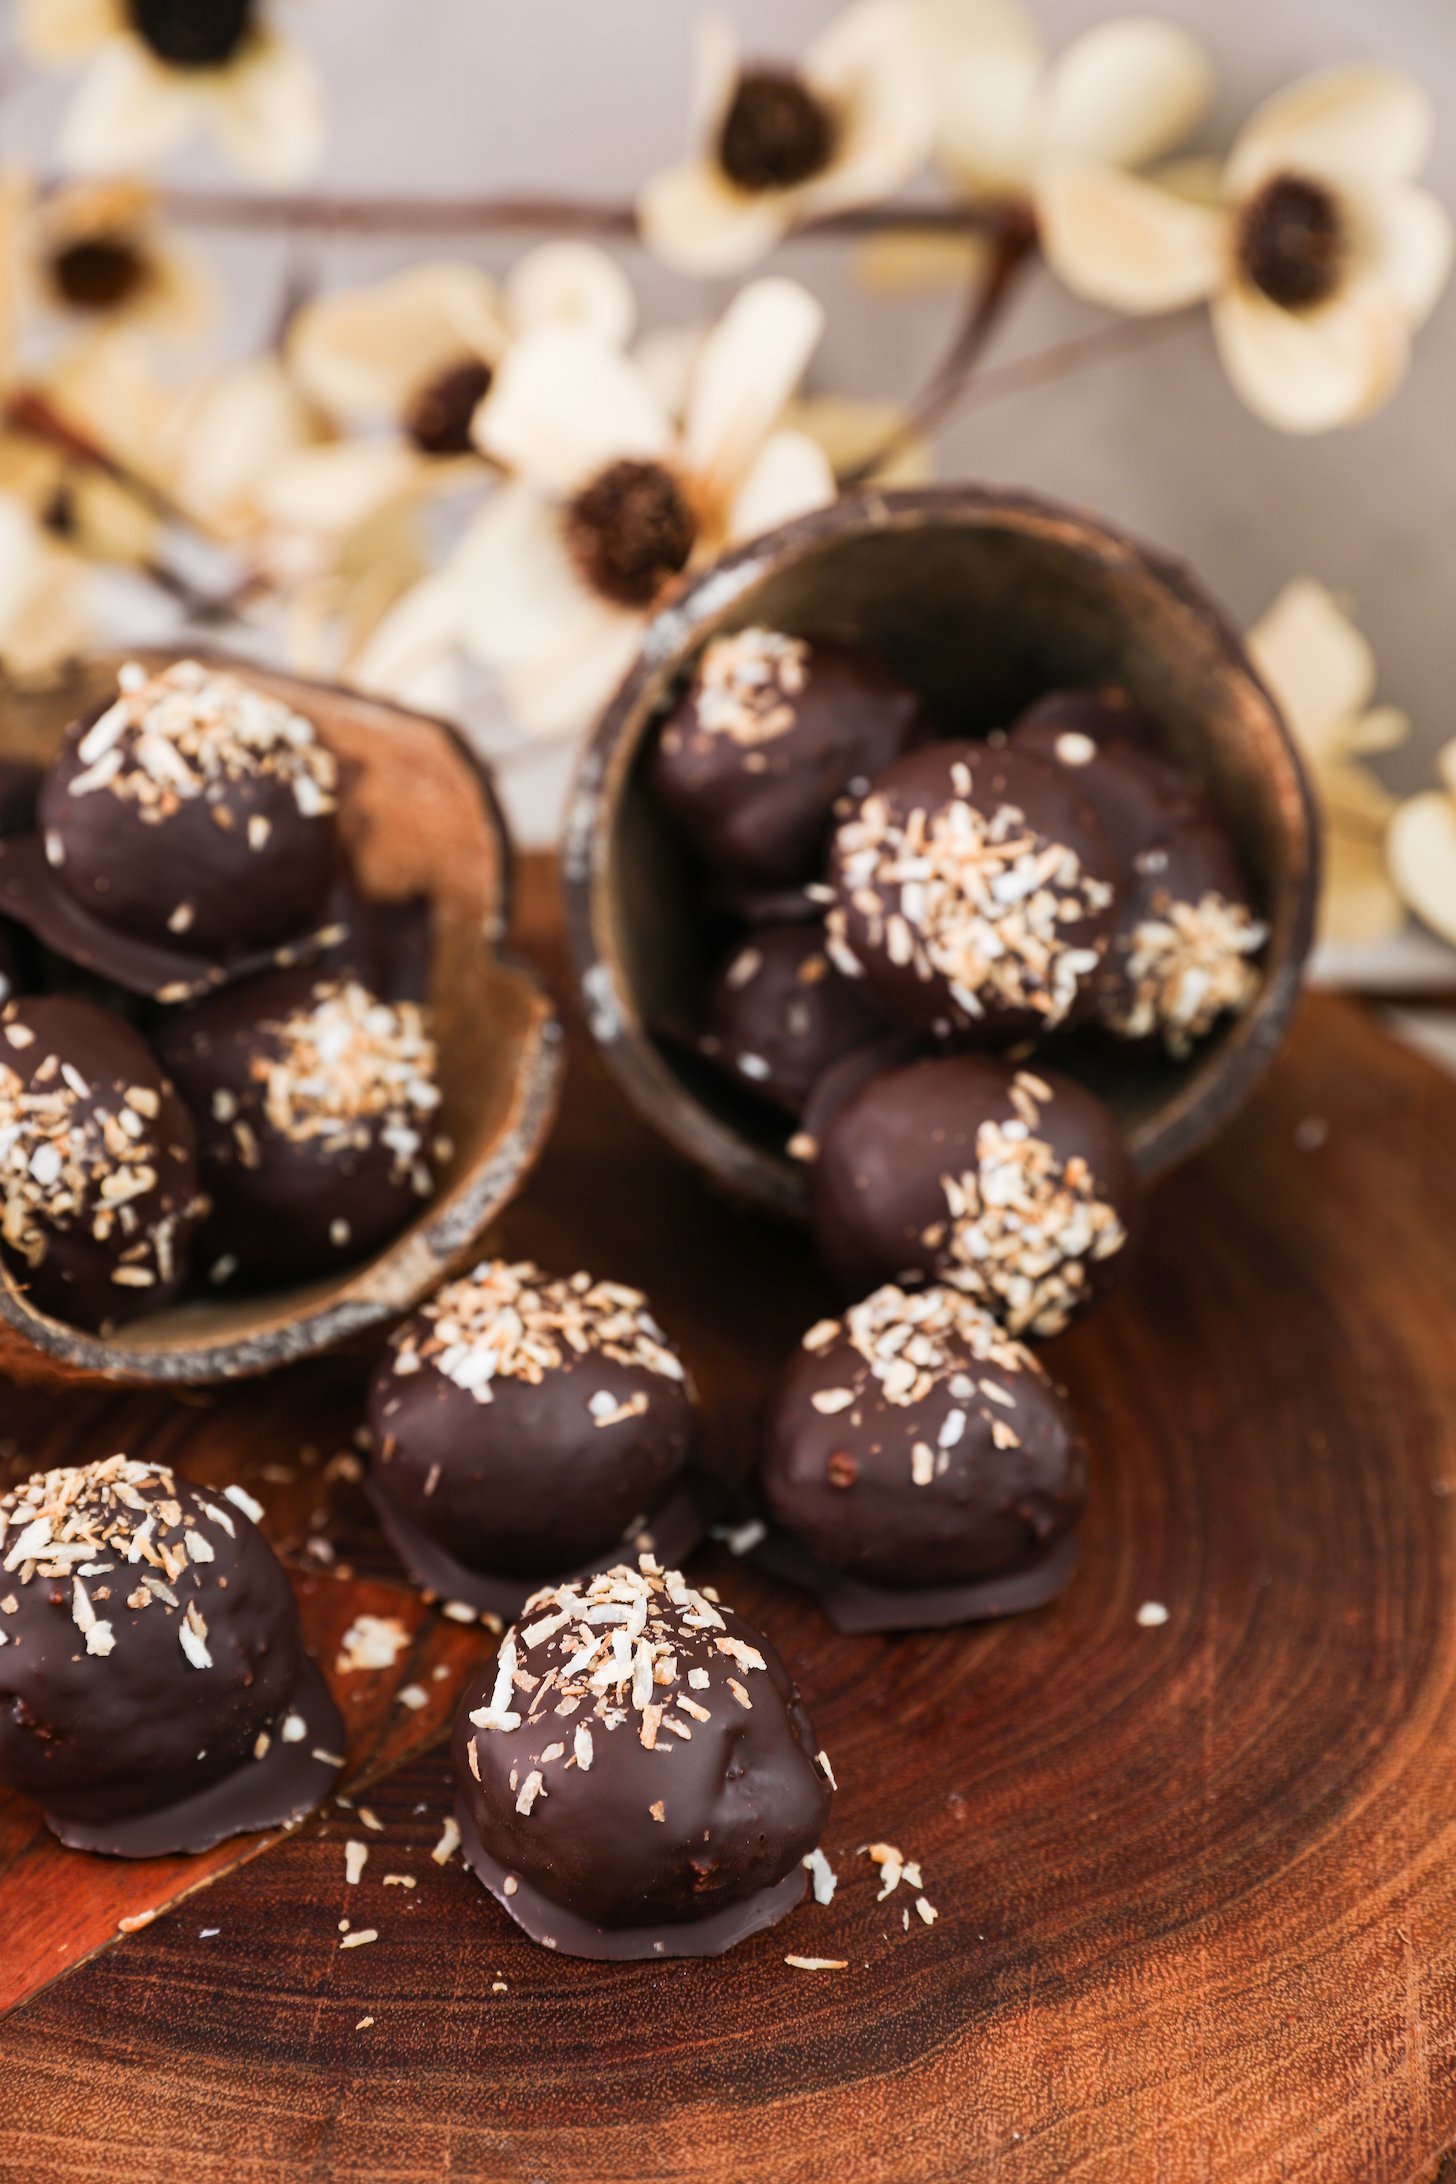 Close up image of chocolate-covered balls with a coconut topping displayed in coconut shells, set against a backdrop of beige flowers.